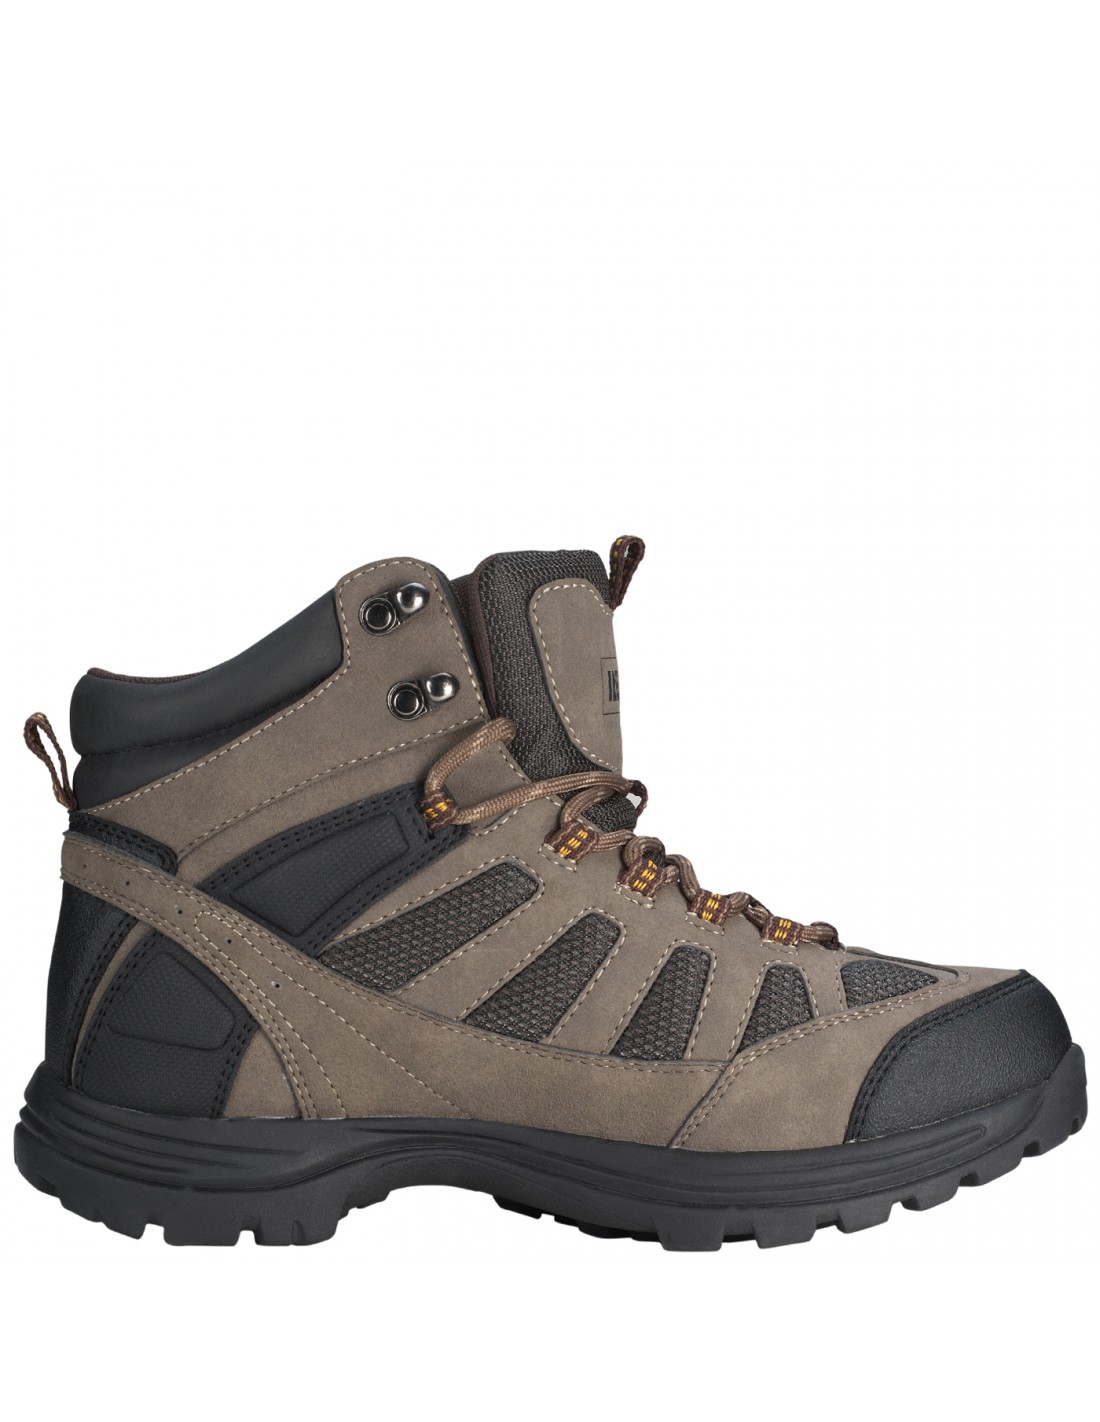 payless hiking shoes